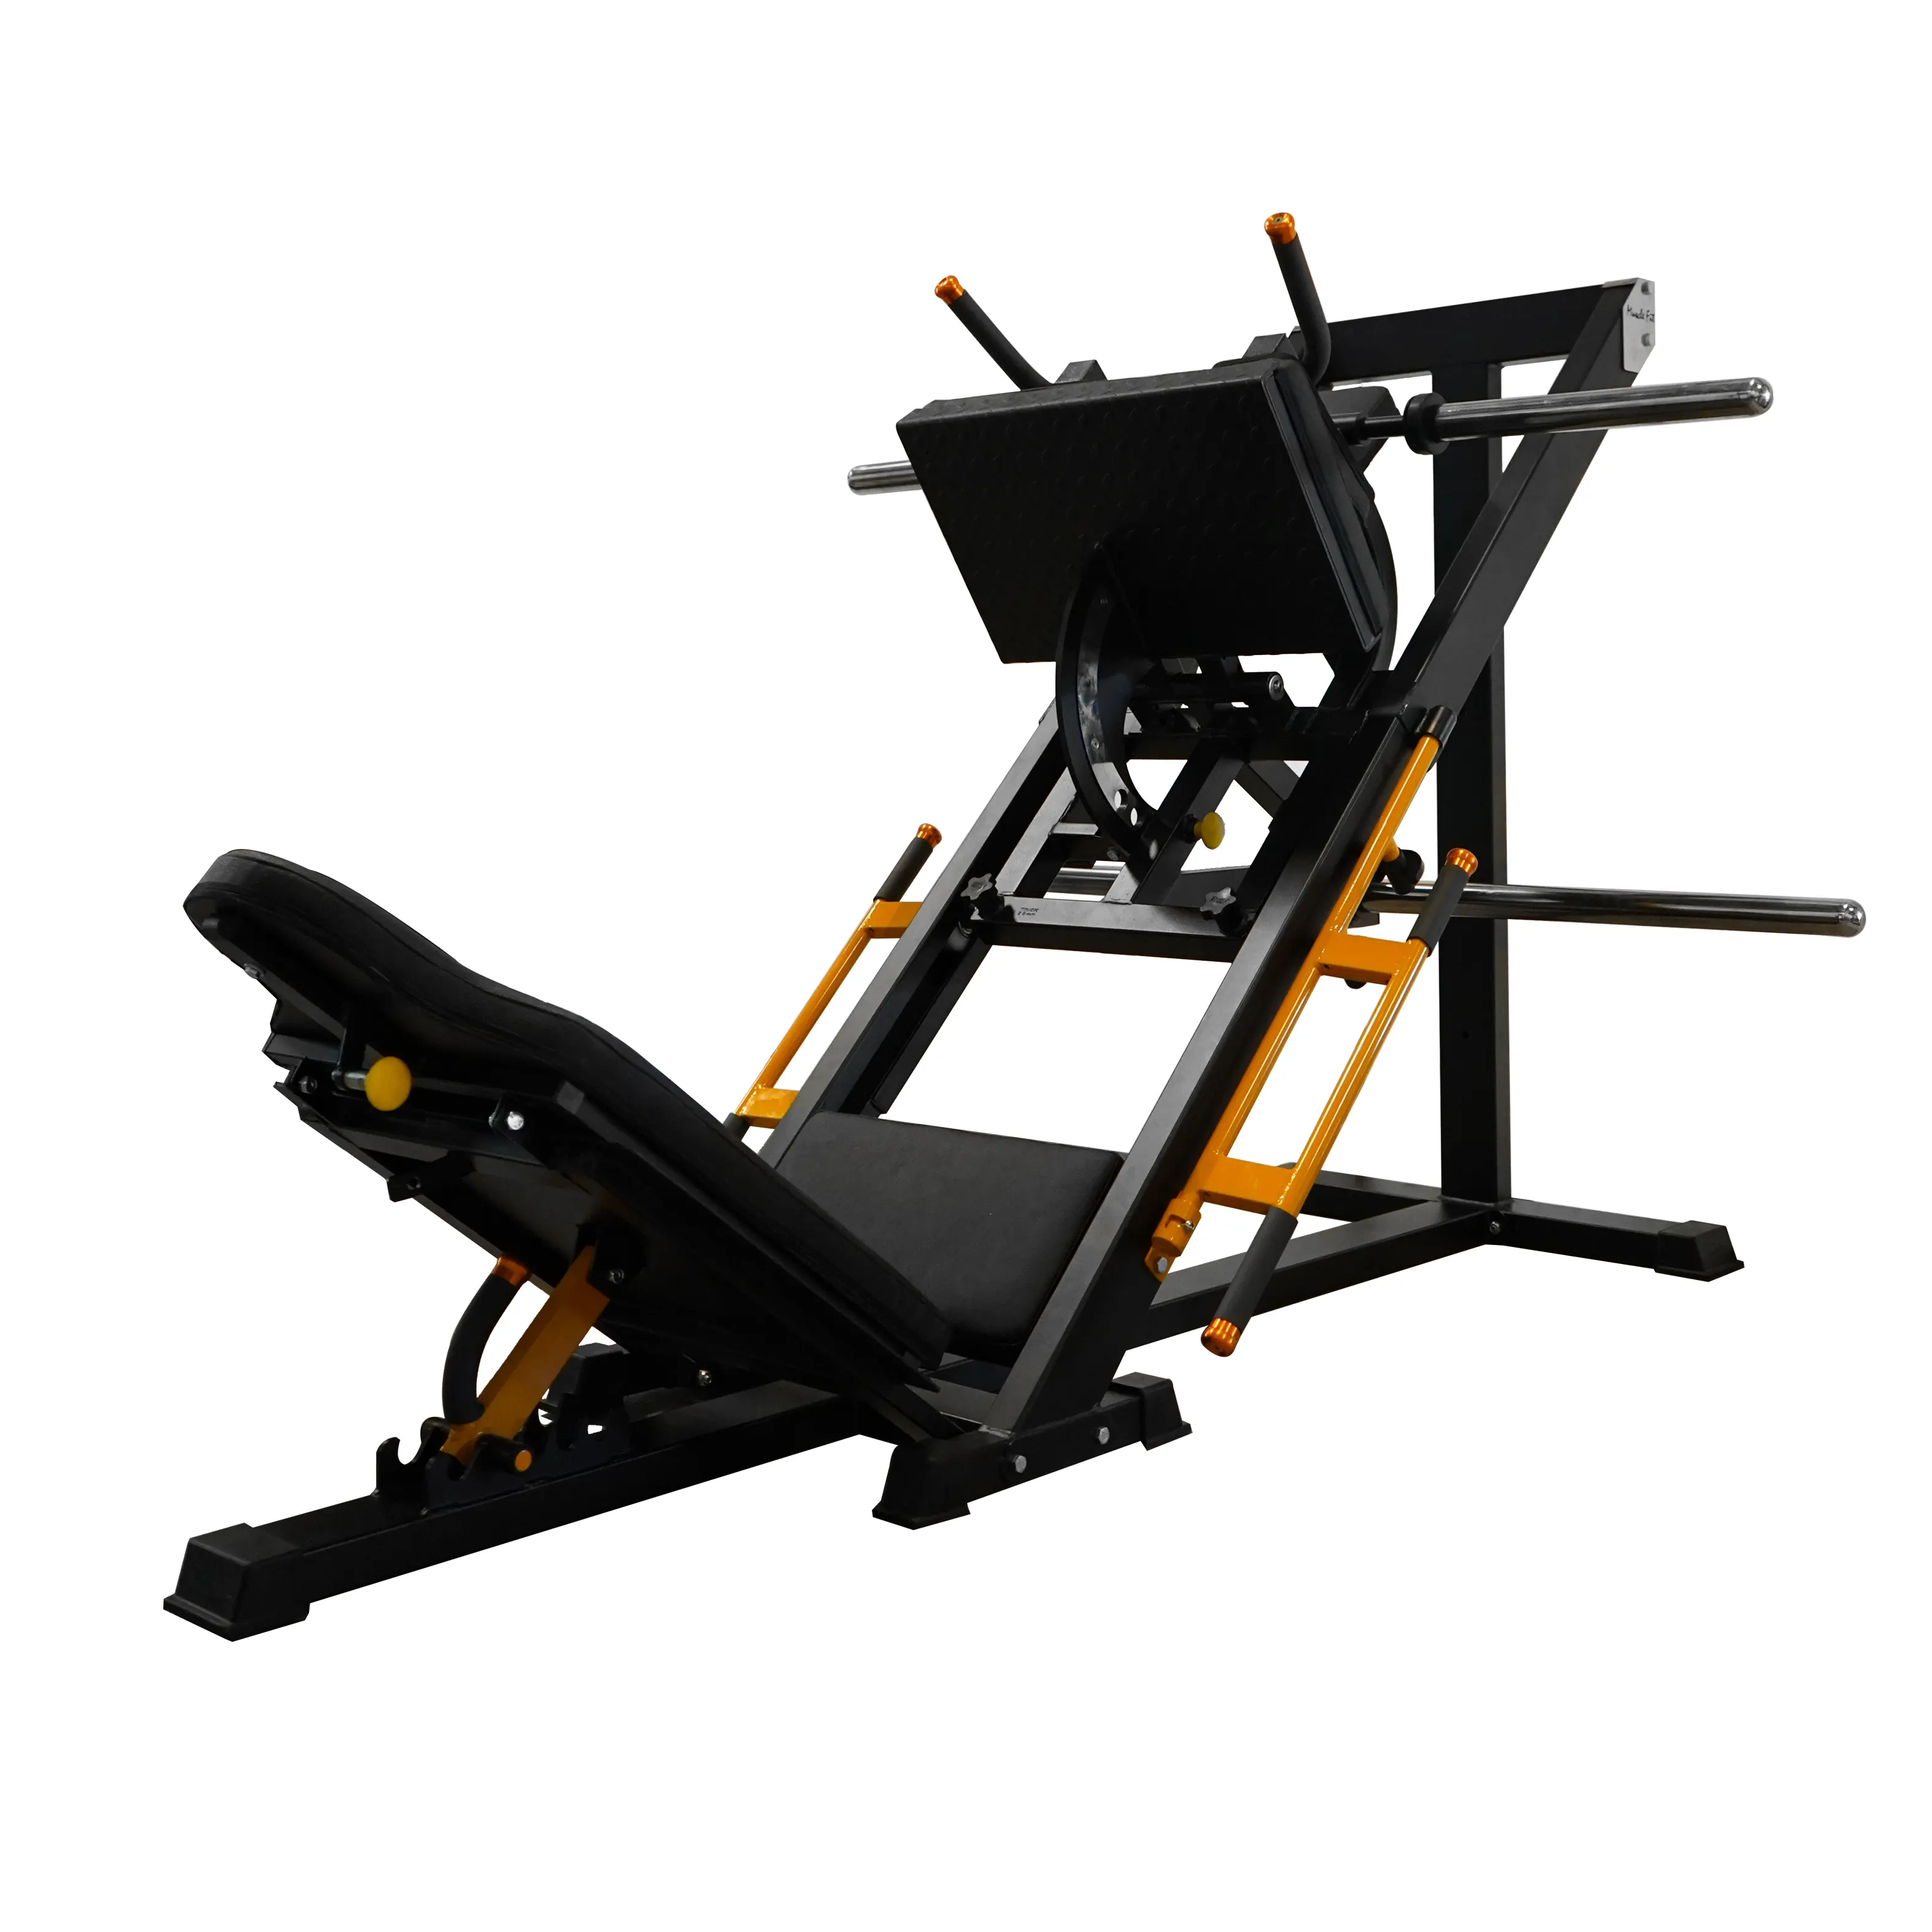 musclefit, plate loaded series, gym equipment, gym, exercise equipment